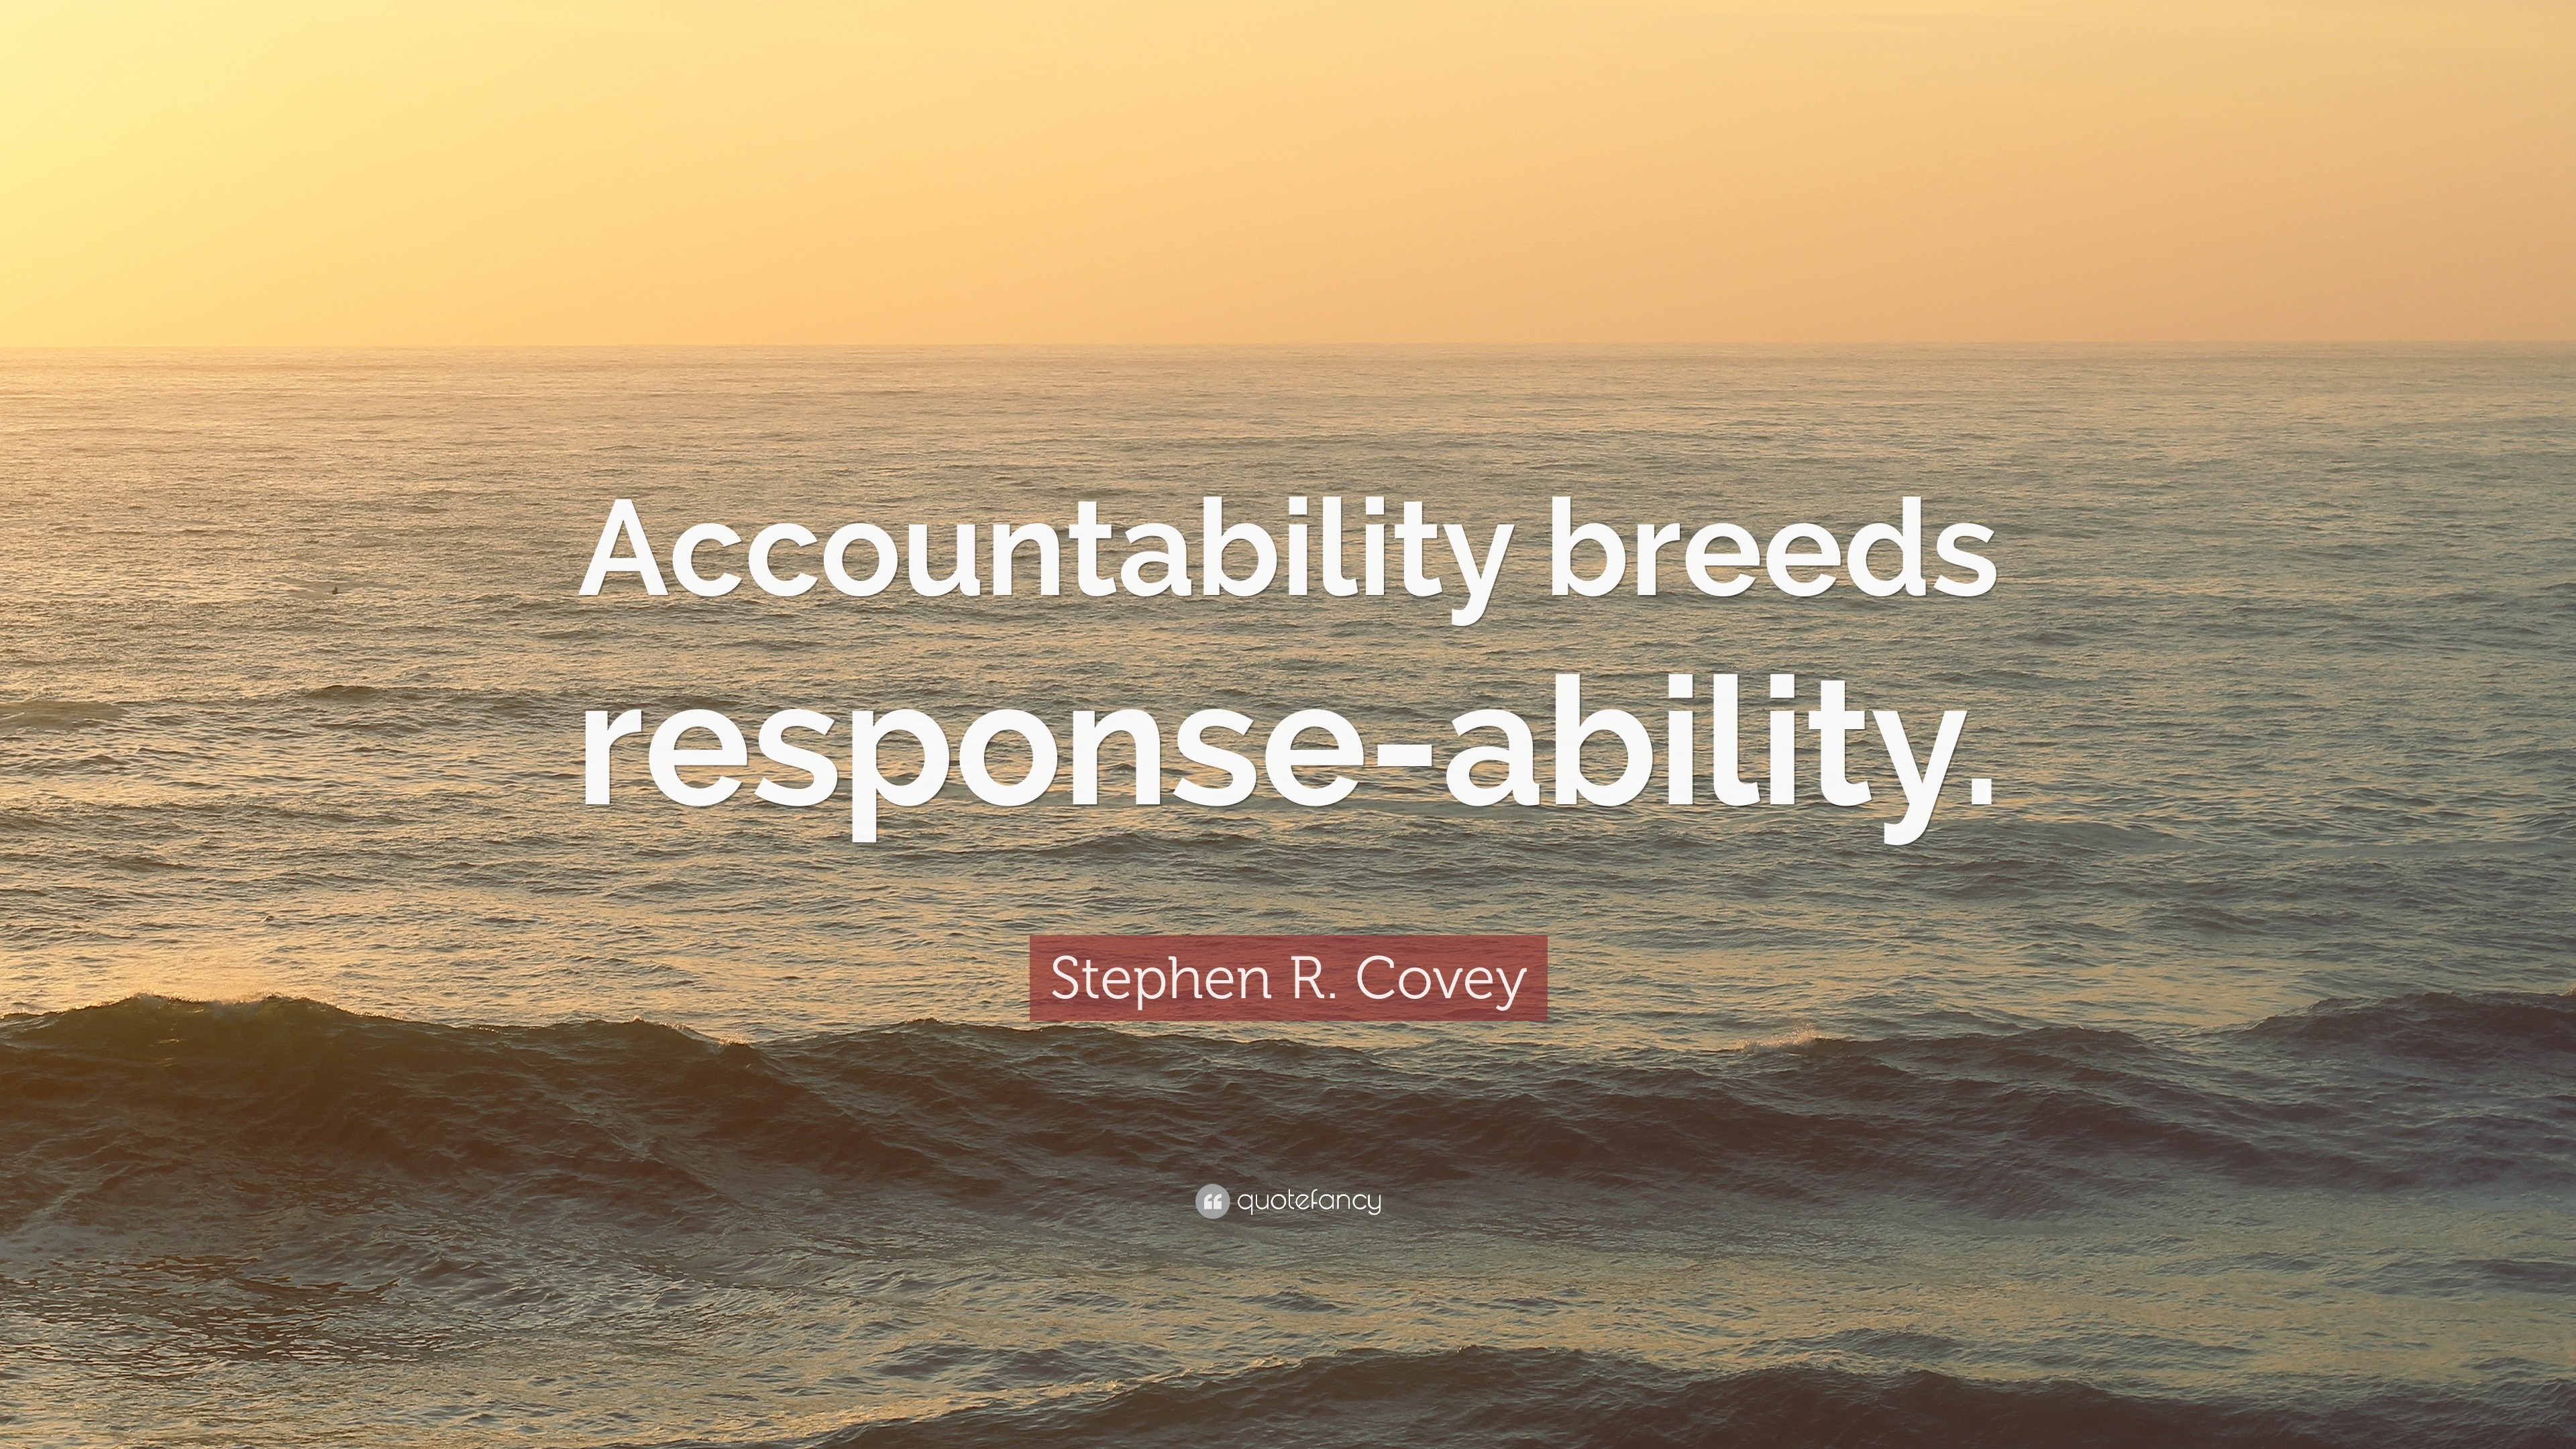 Stephen R. Covey Quote: “Accountability breeds response-ability.”